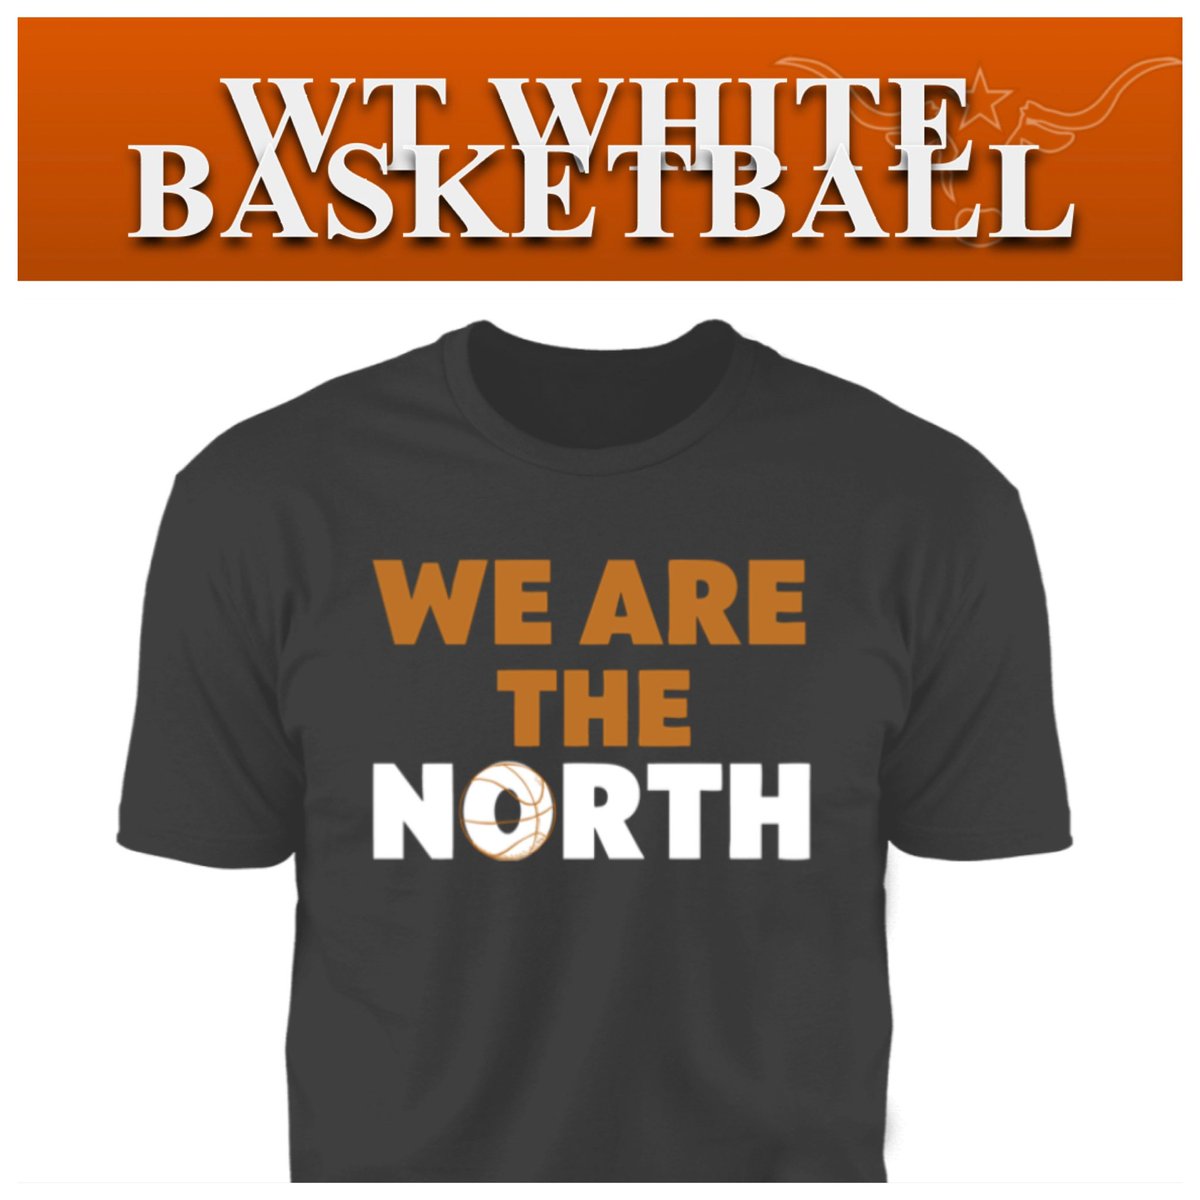 Get your custom basketball “We Are The North” shirts that are live now! Click the link below. 🤘🏽

#WeAretheNorth #HornsUp #35South #PlayBigDallas #5A #TX

shop.verticalraise.com/shops/texas/da…